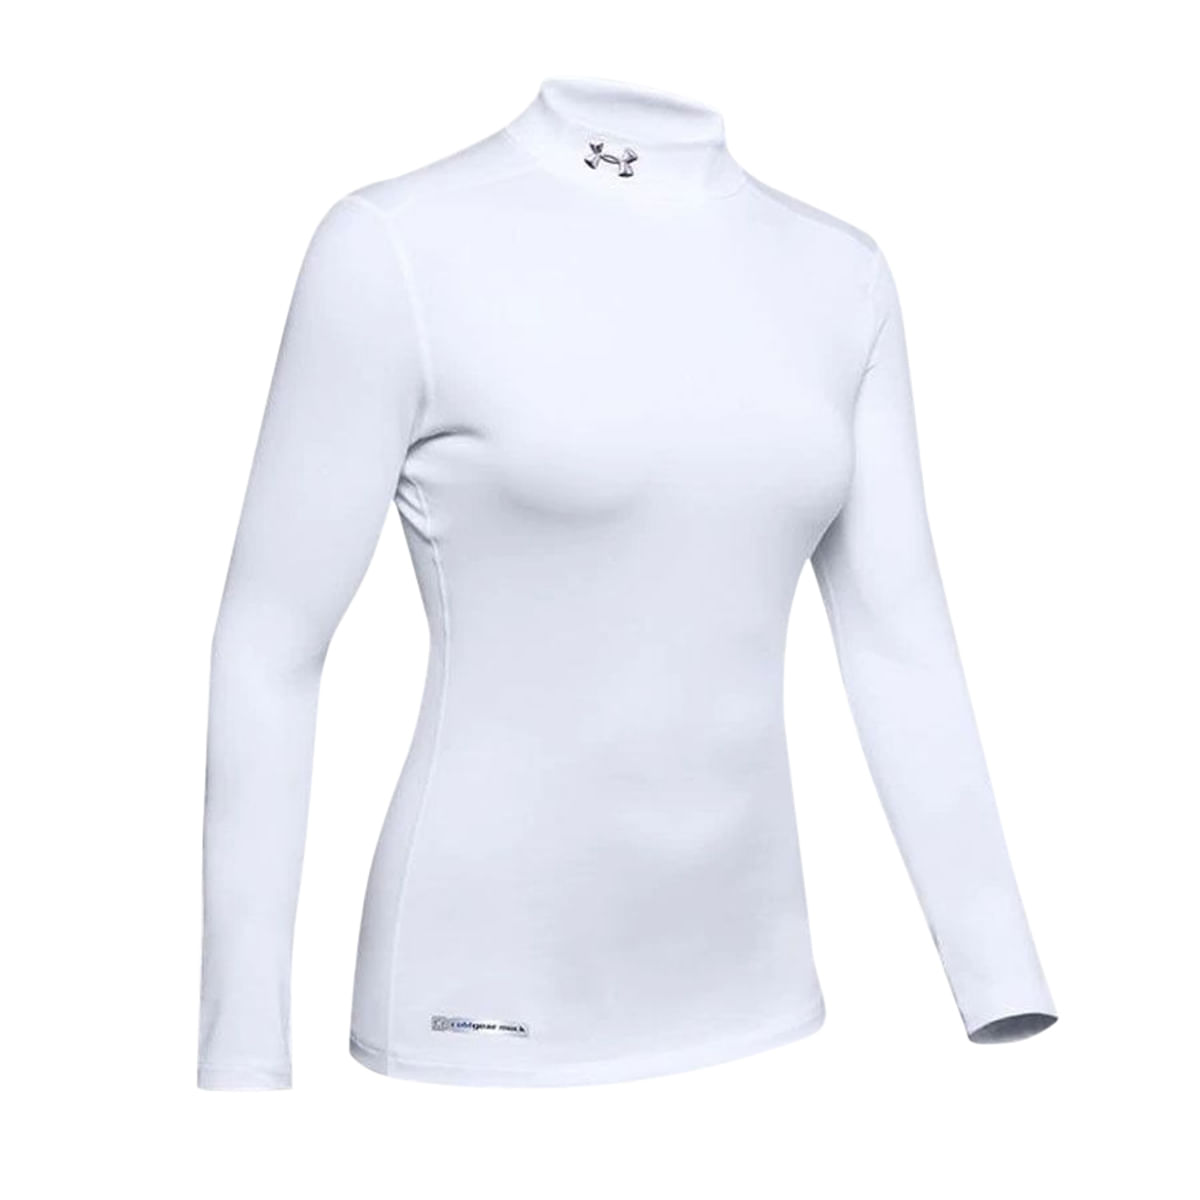 Under Armour Womens THE COLDGEAR MOCK WHITE - Paragon Sports